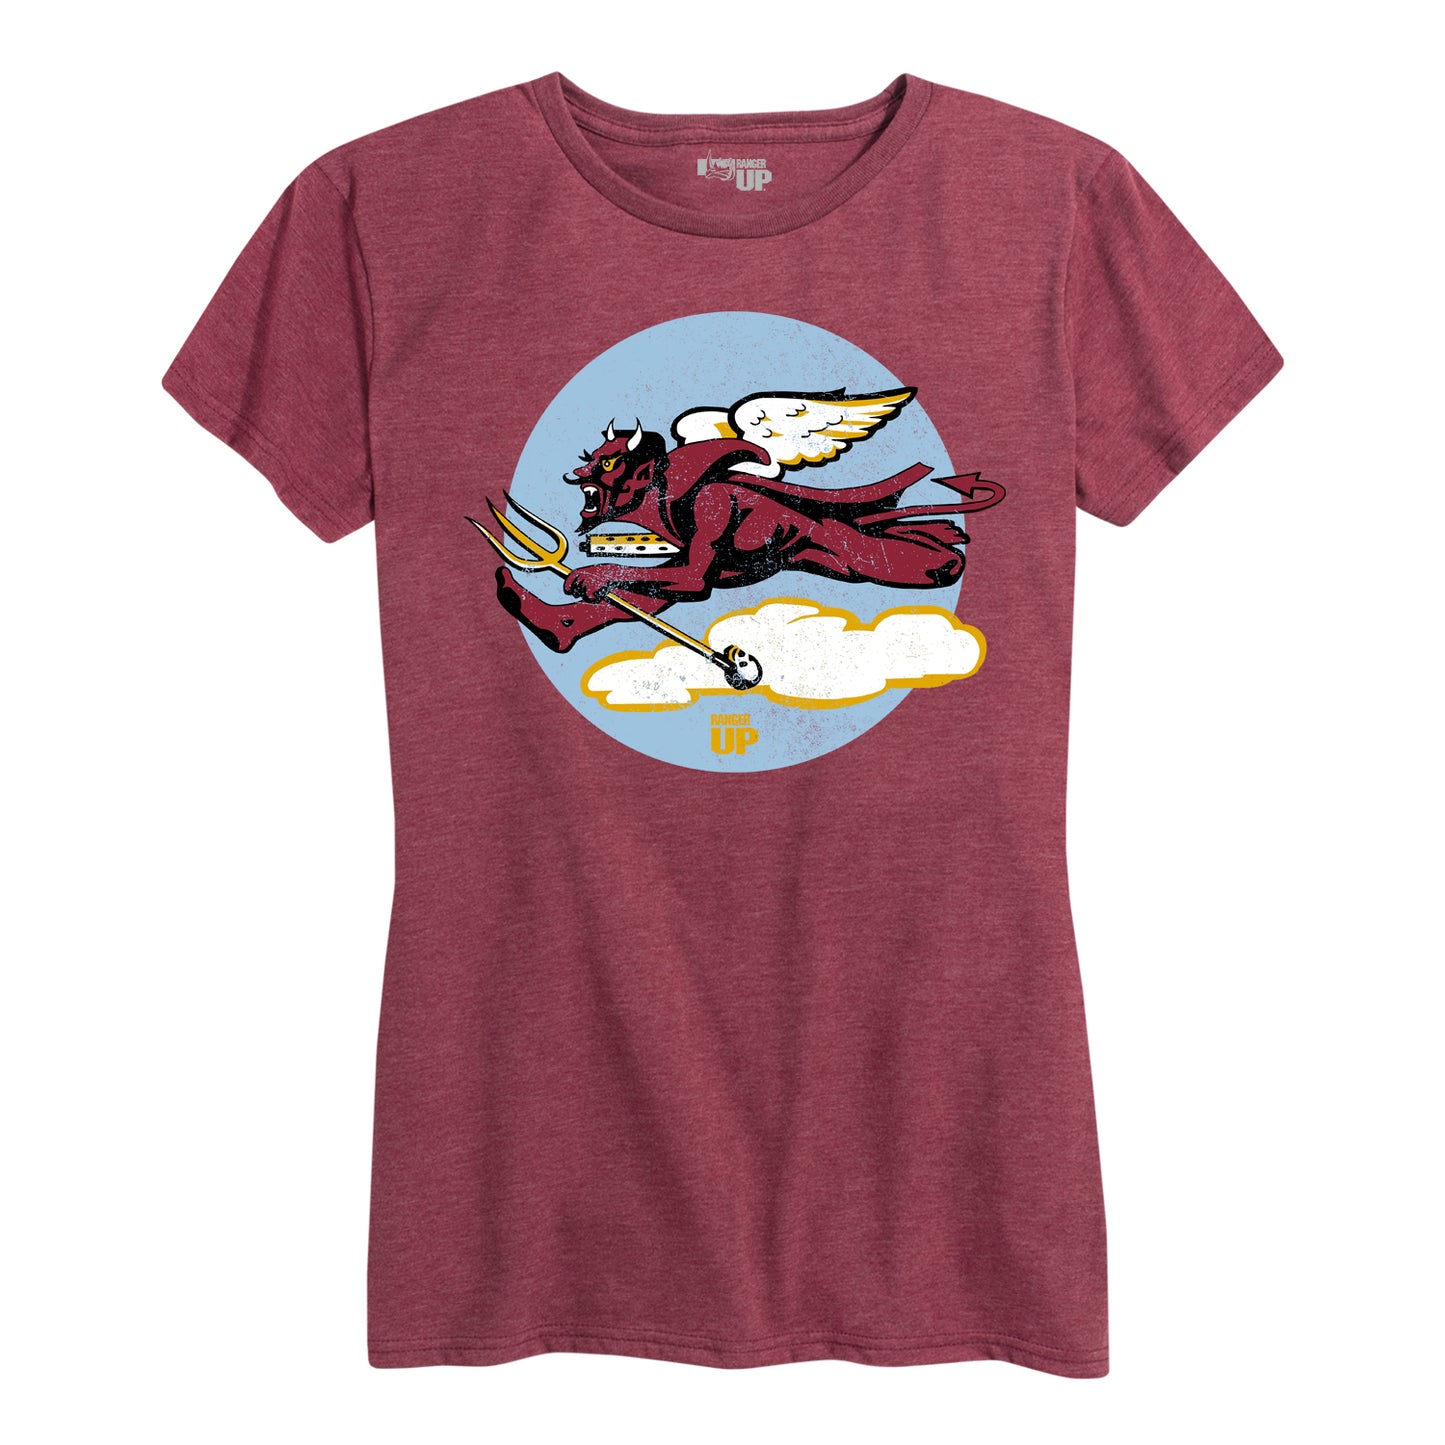 Women's 302nd Fighter Squadron Tee